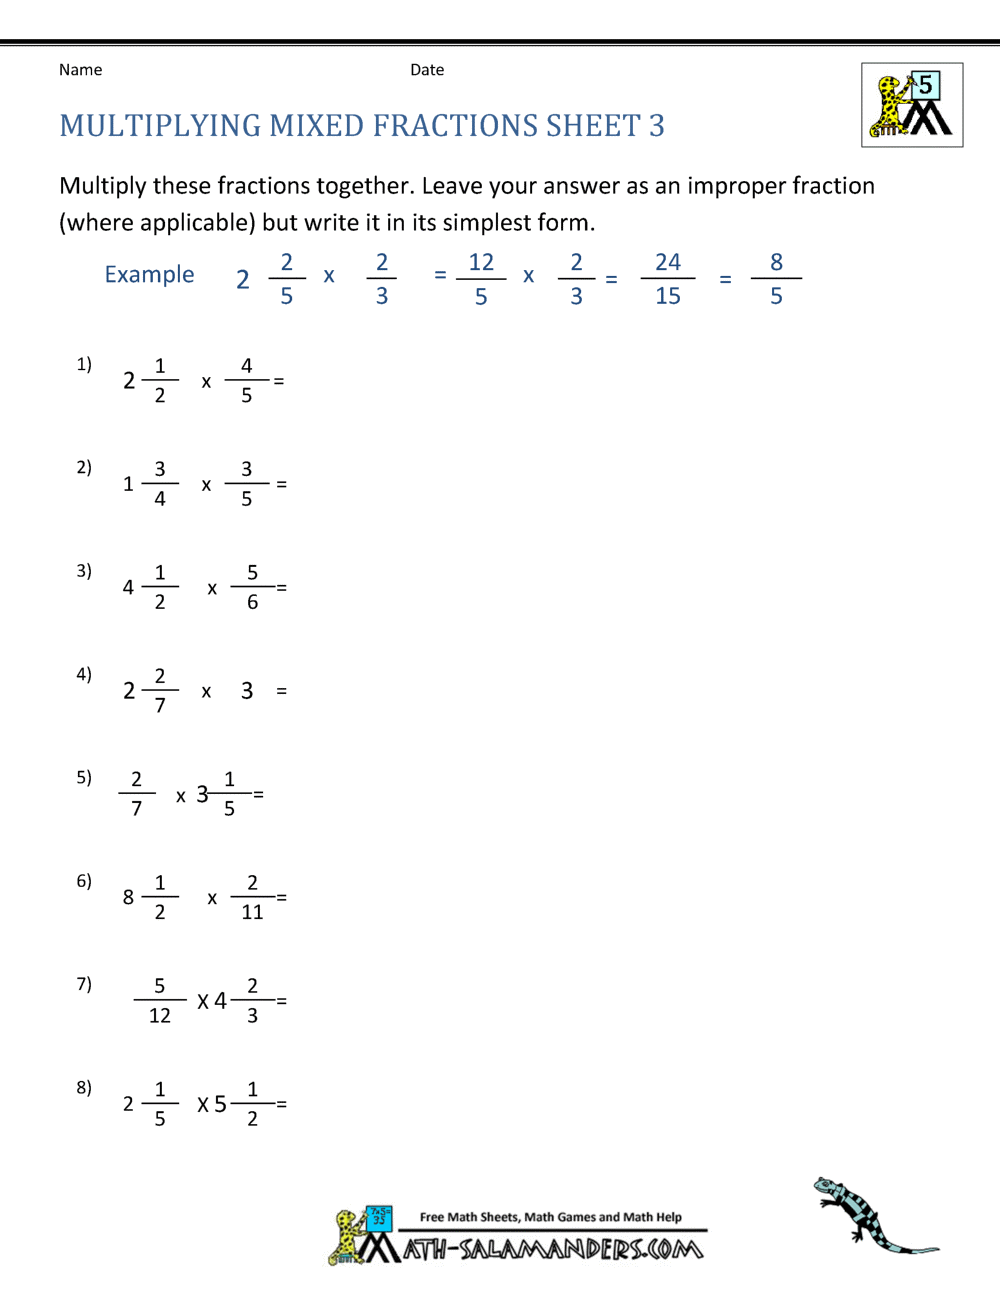 multiplying-mixed-fractions